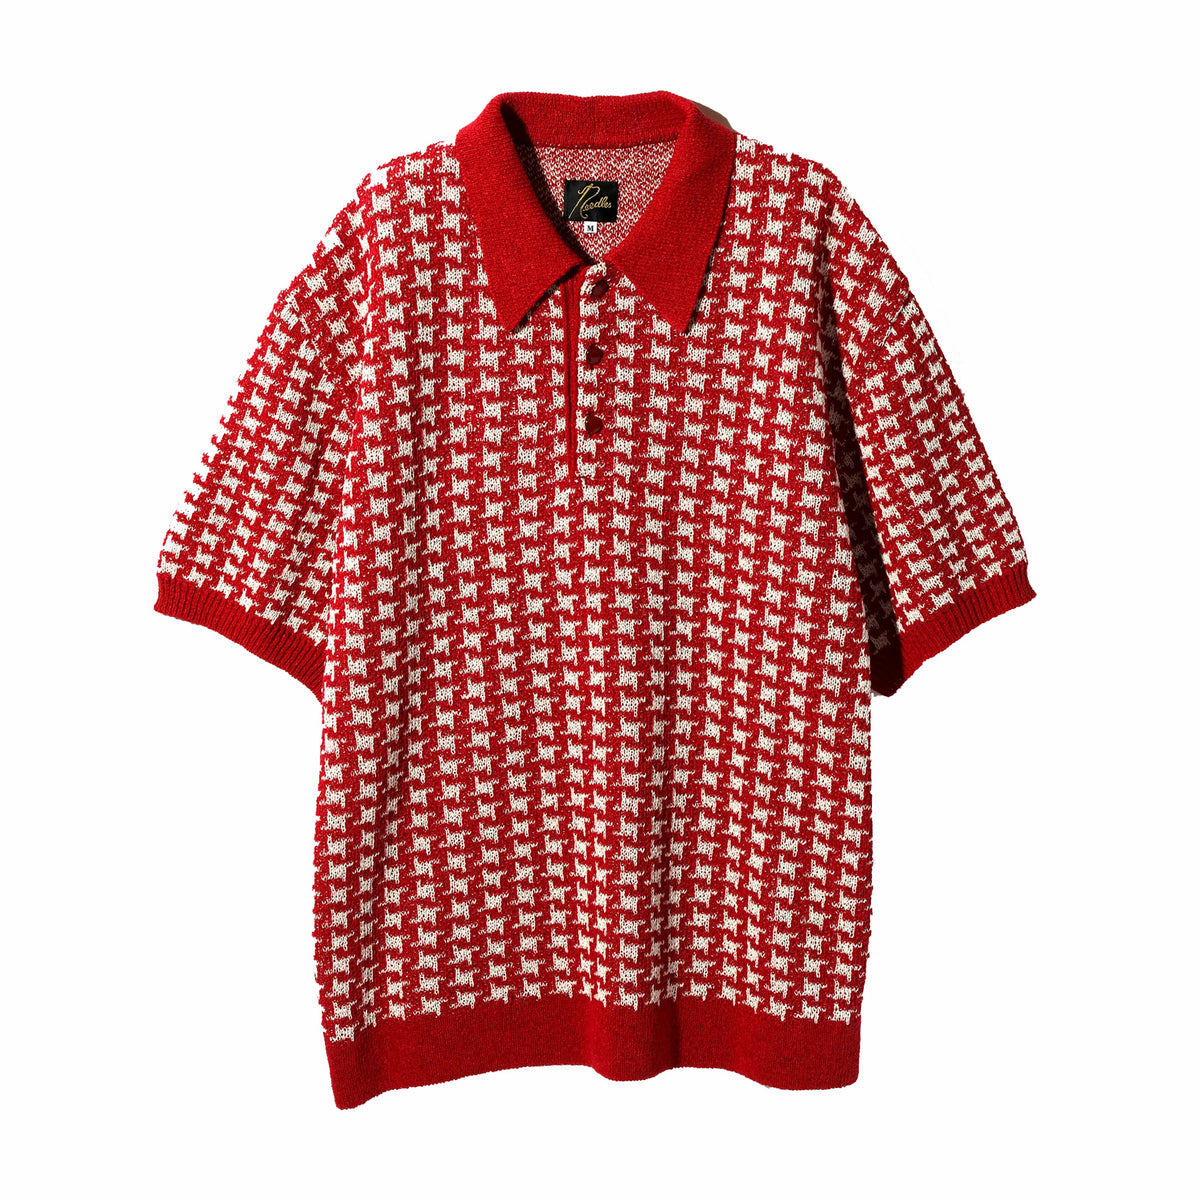 Needles Polo Sweater - Houndstooth (Red) – August